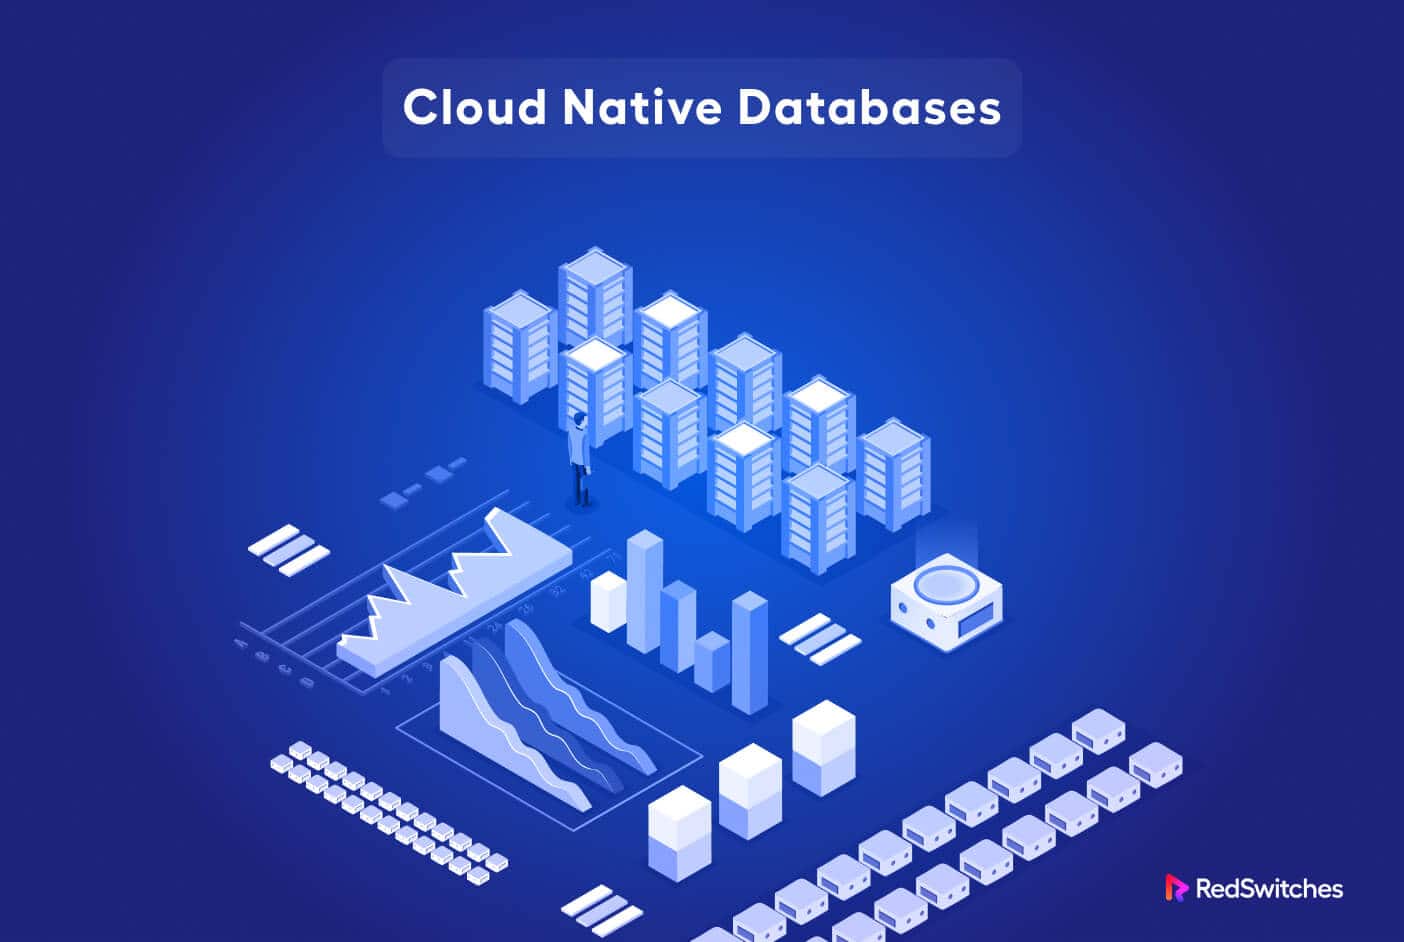 Cloud Native Databases